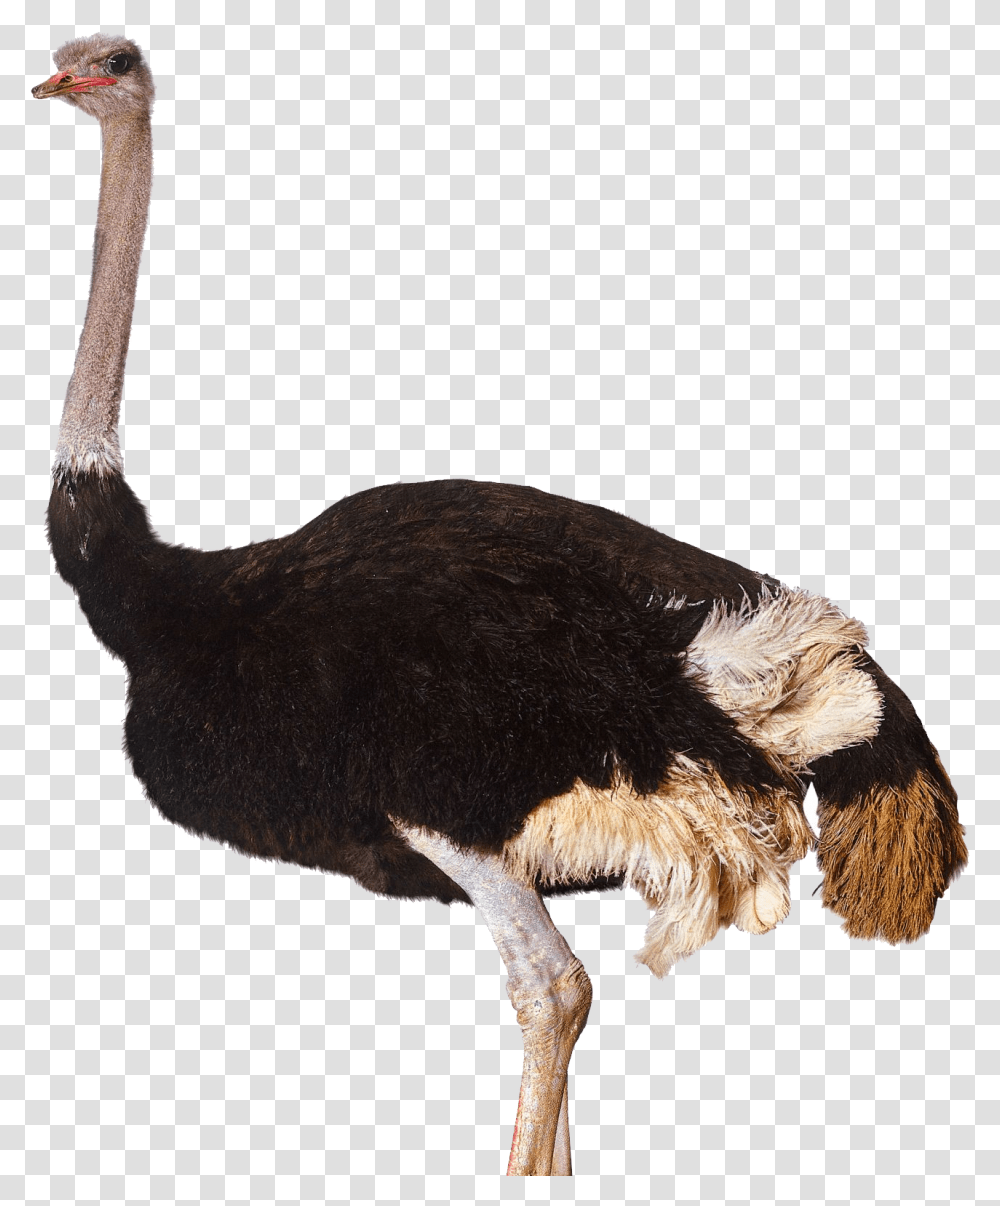 Ostrich Images Free Download Ostrich, Bird, Animal, Antelope, Wildlife Transparent Png